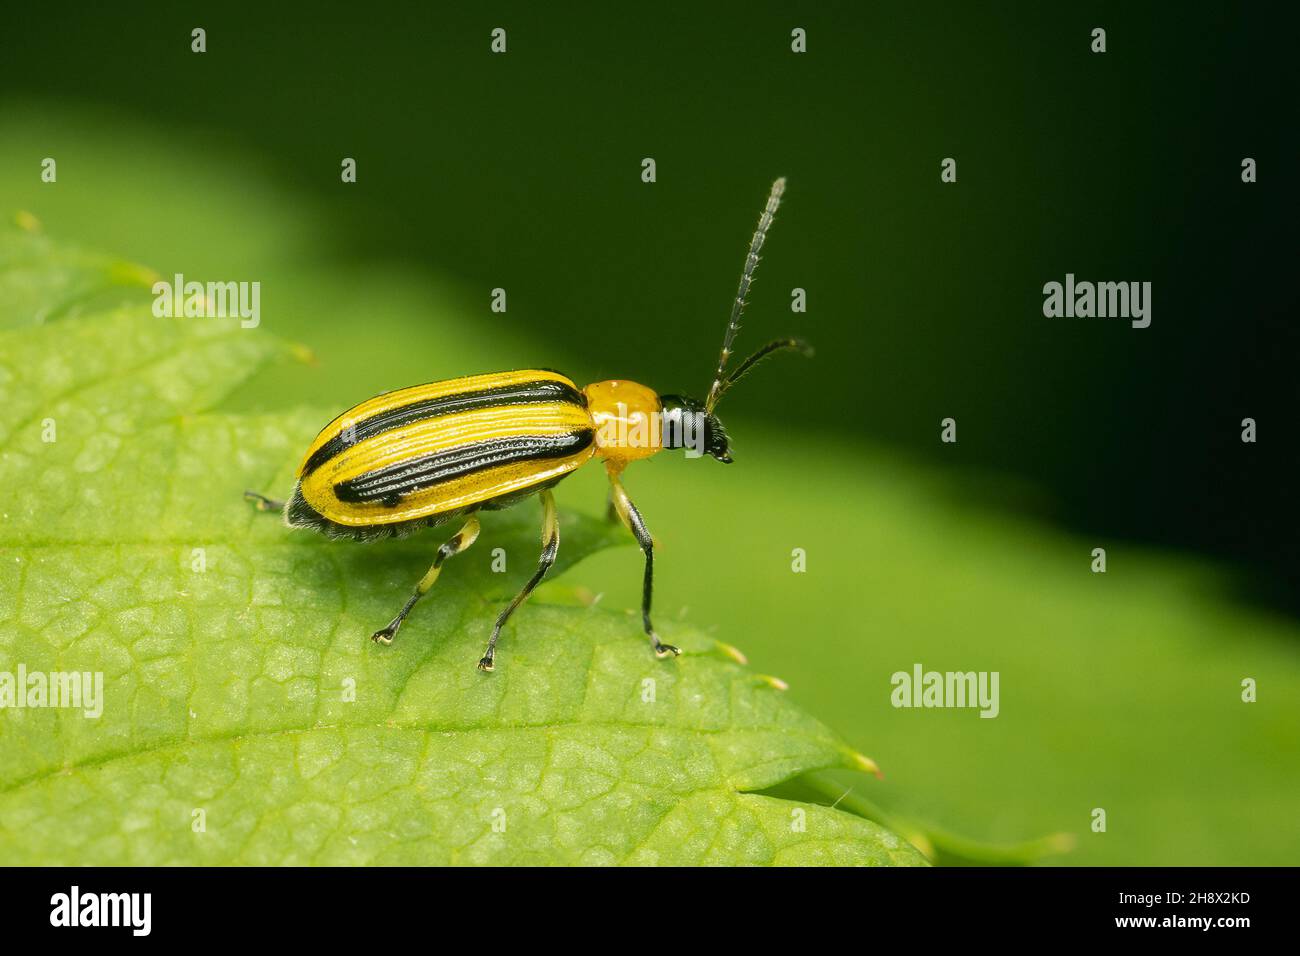 Striped Cucumber Beetle reste on a green leaf with blurred background and copy space Stock Photo